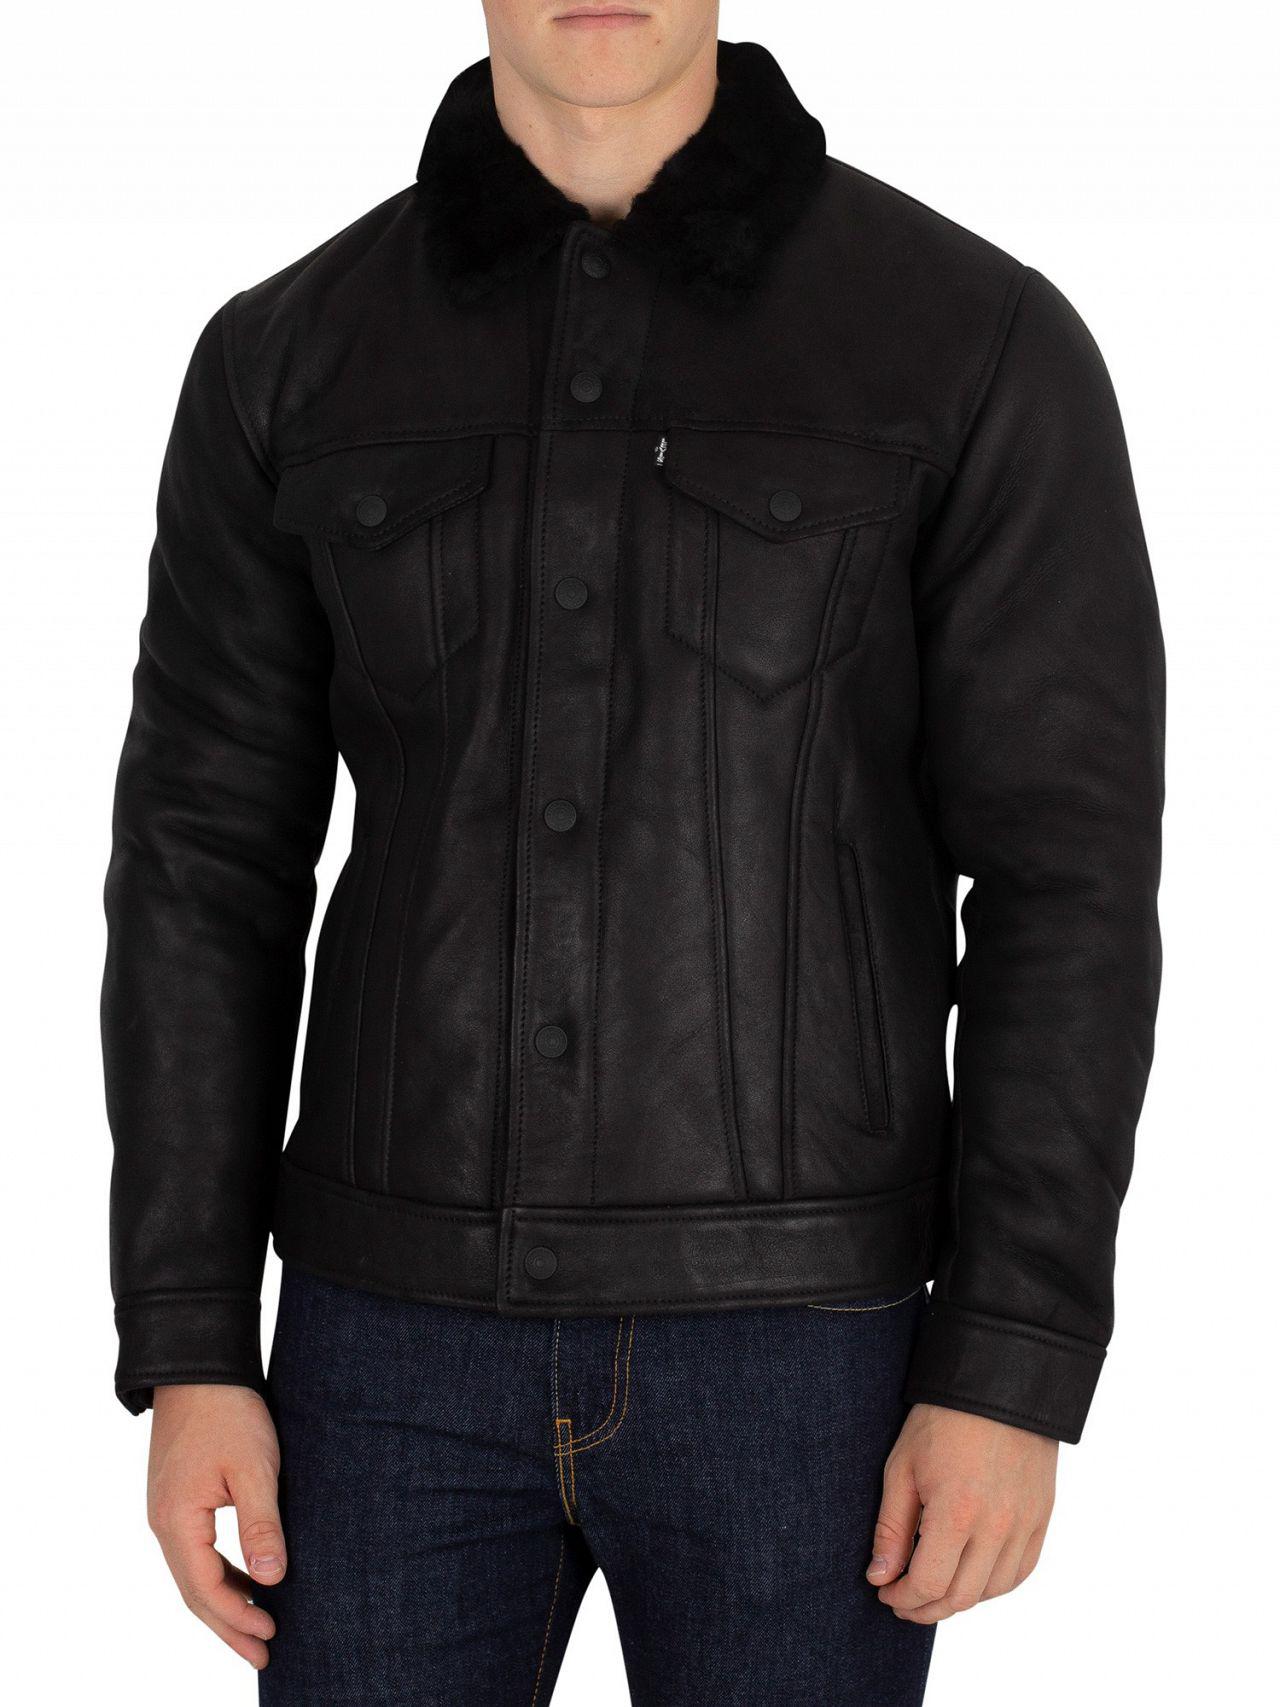 Lyst - Levi's Black The Shearling Trucker Leather Jacket in Black for Men